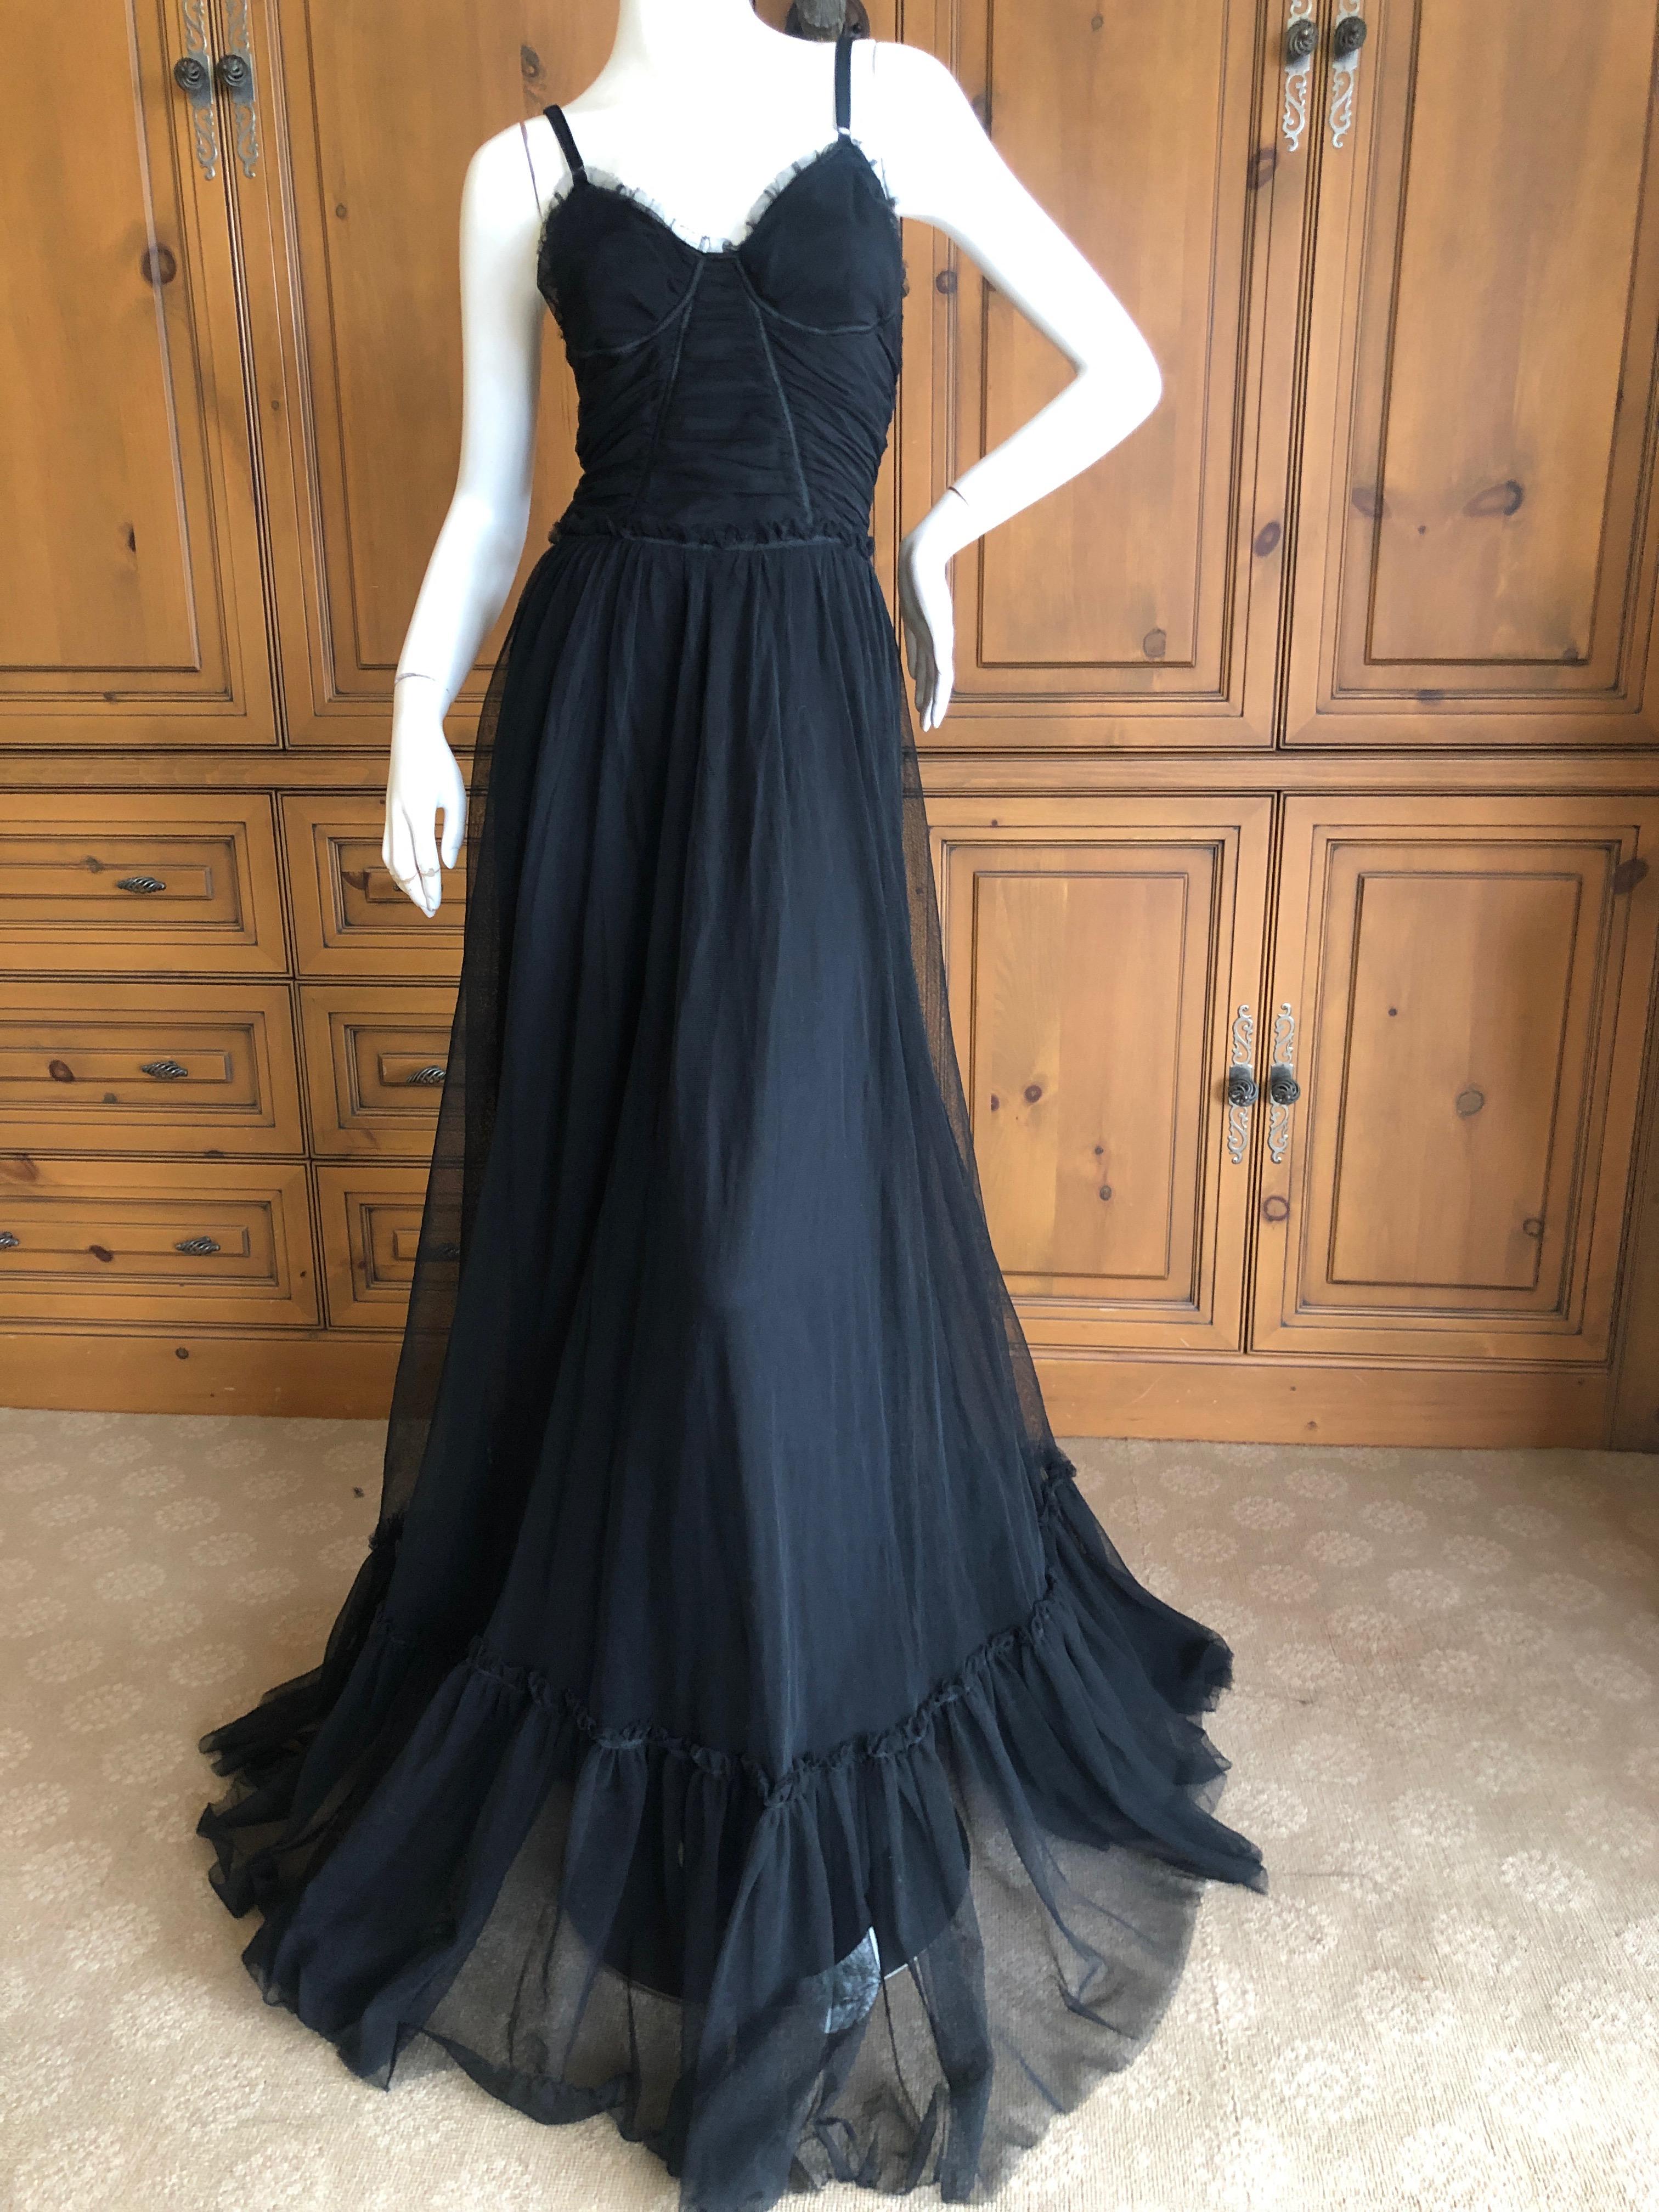 Dolce & Gabbana D&G Vintage Goth Black Morticia Gown with Flowing Long Skirt
Size 44, there is stretch in this fabric.
Bust 36